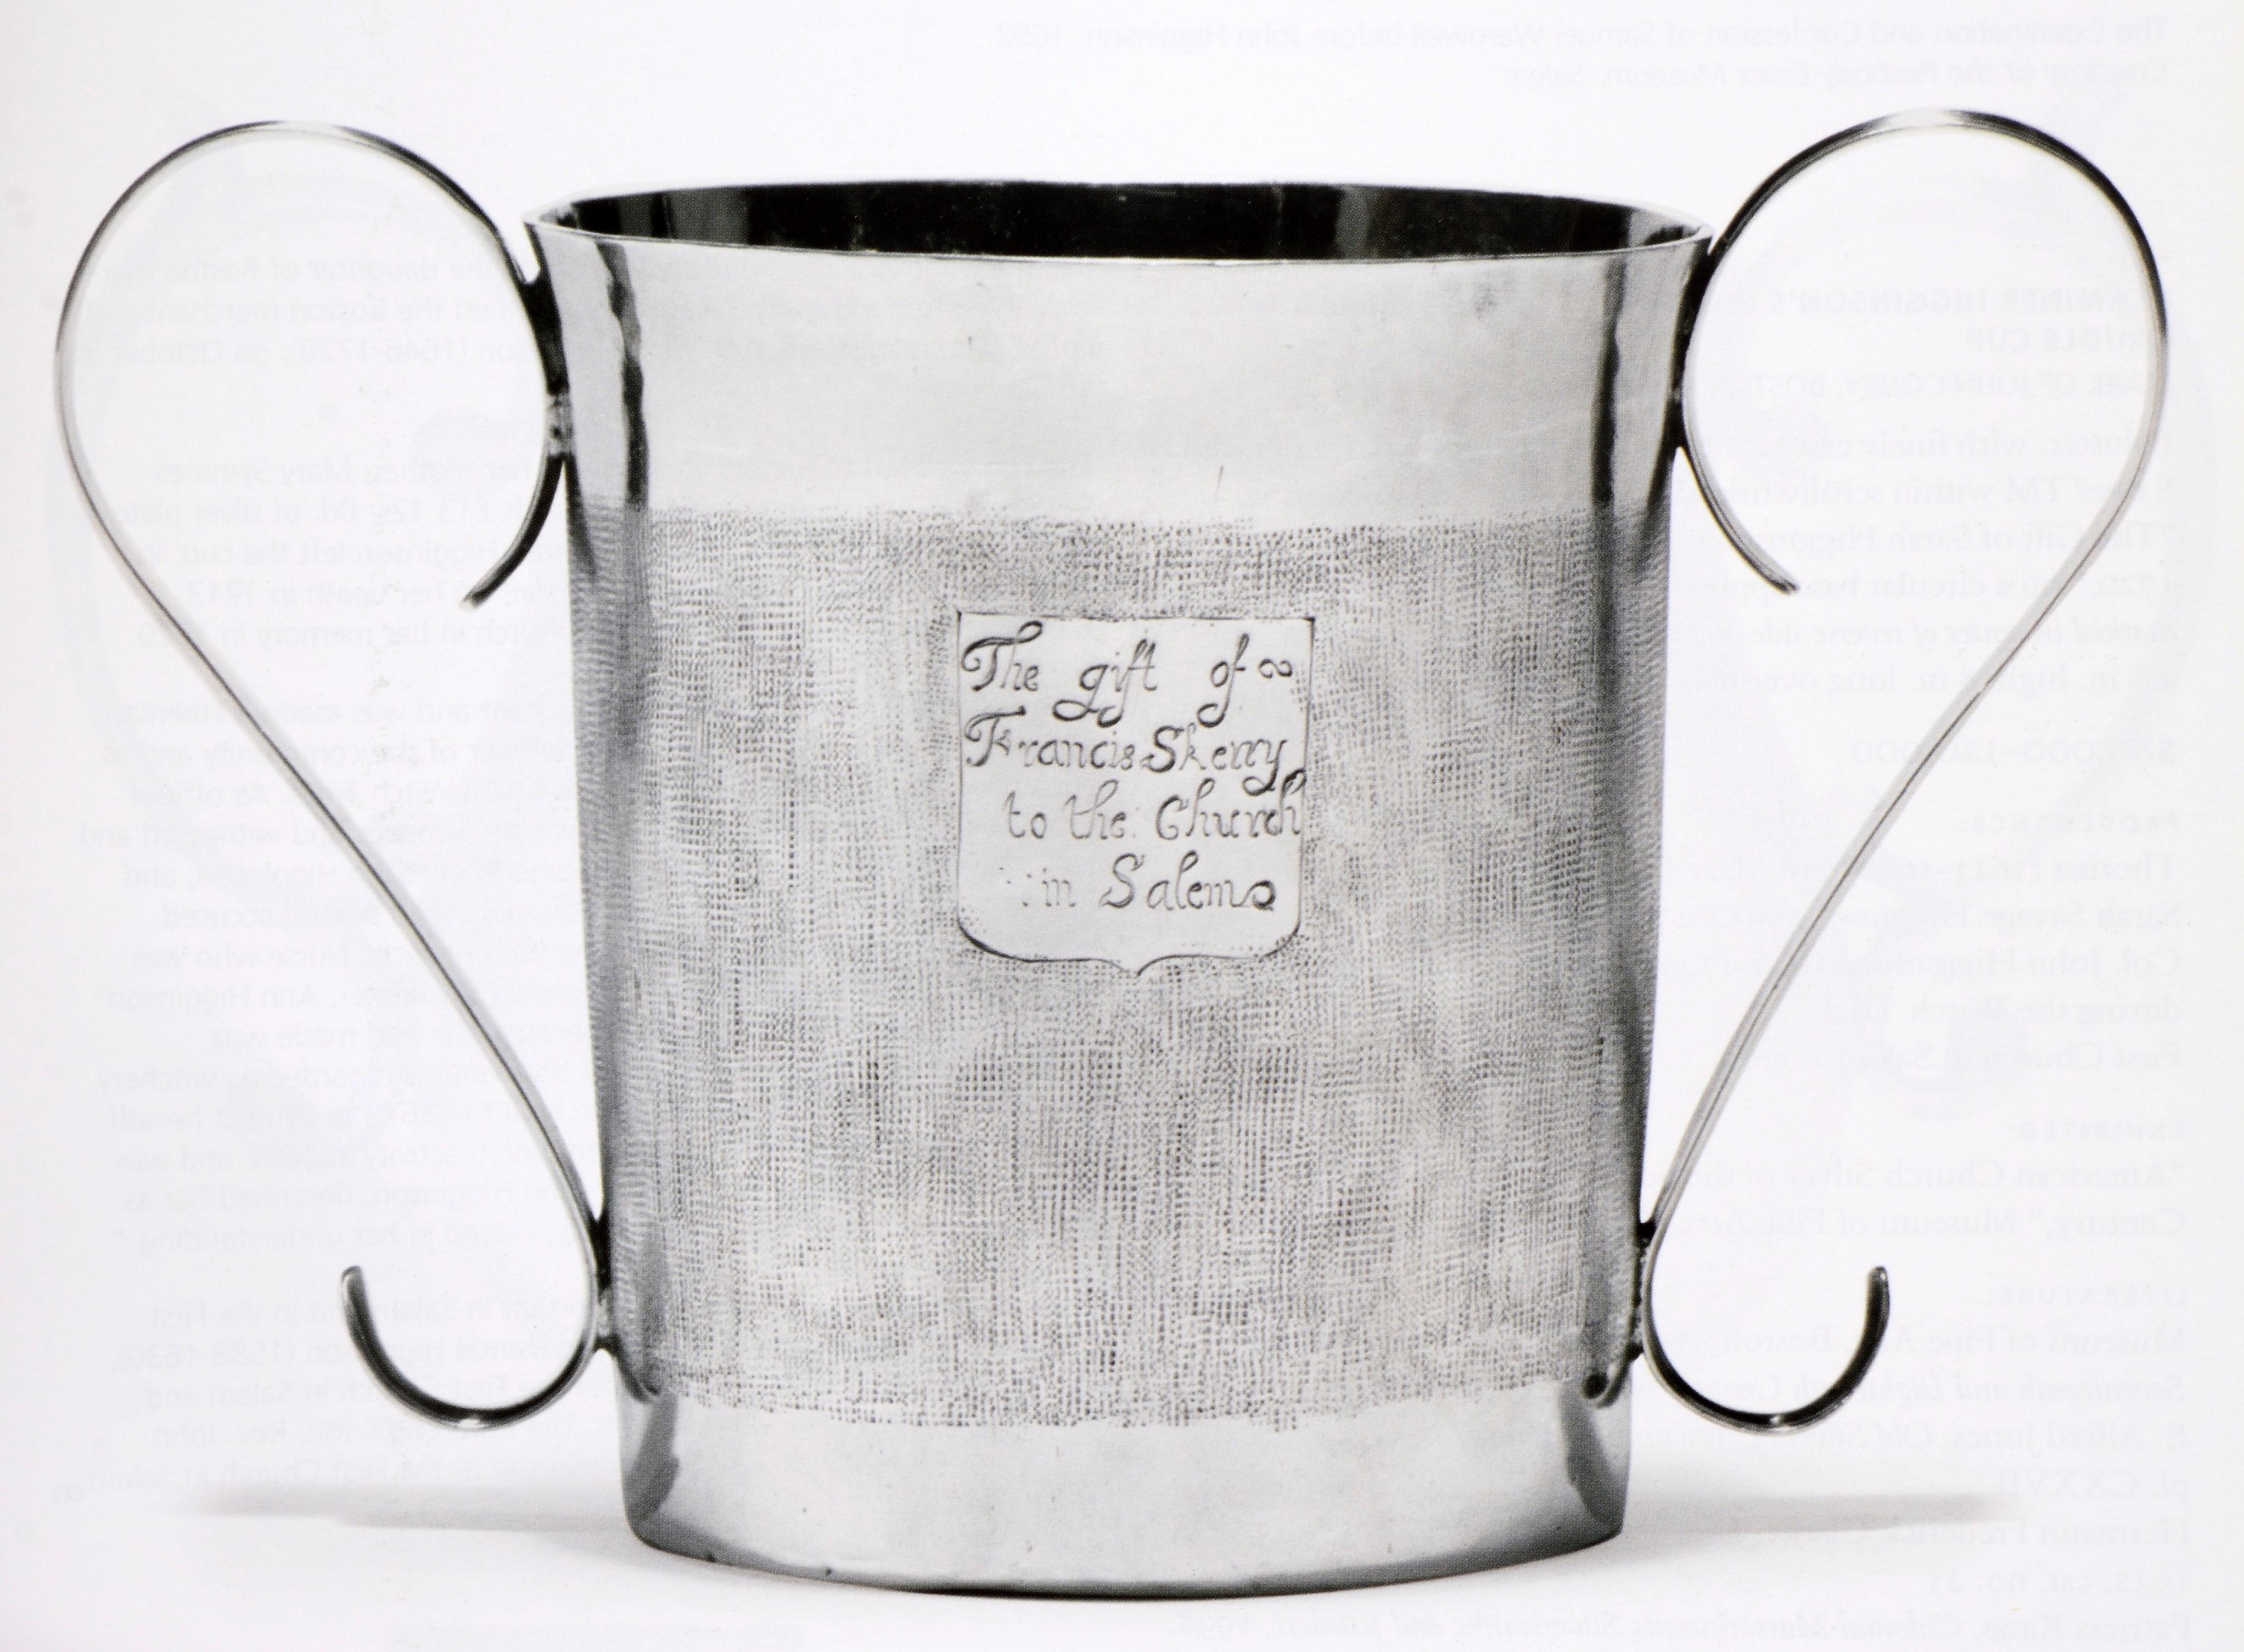 2 Cats. Early American Silver Darling Foundation & Silver Monteith by John Coney For Sale 10